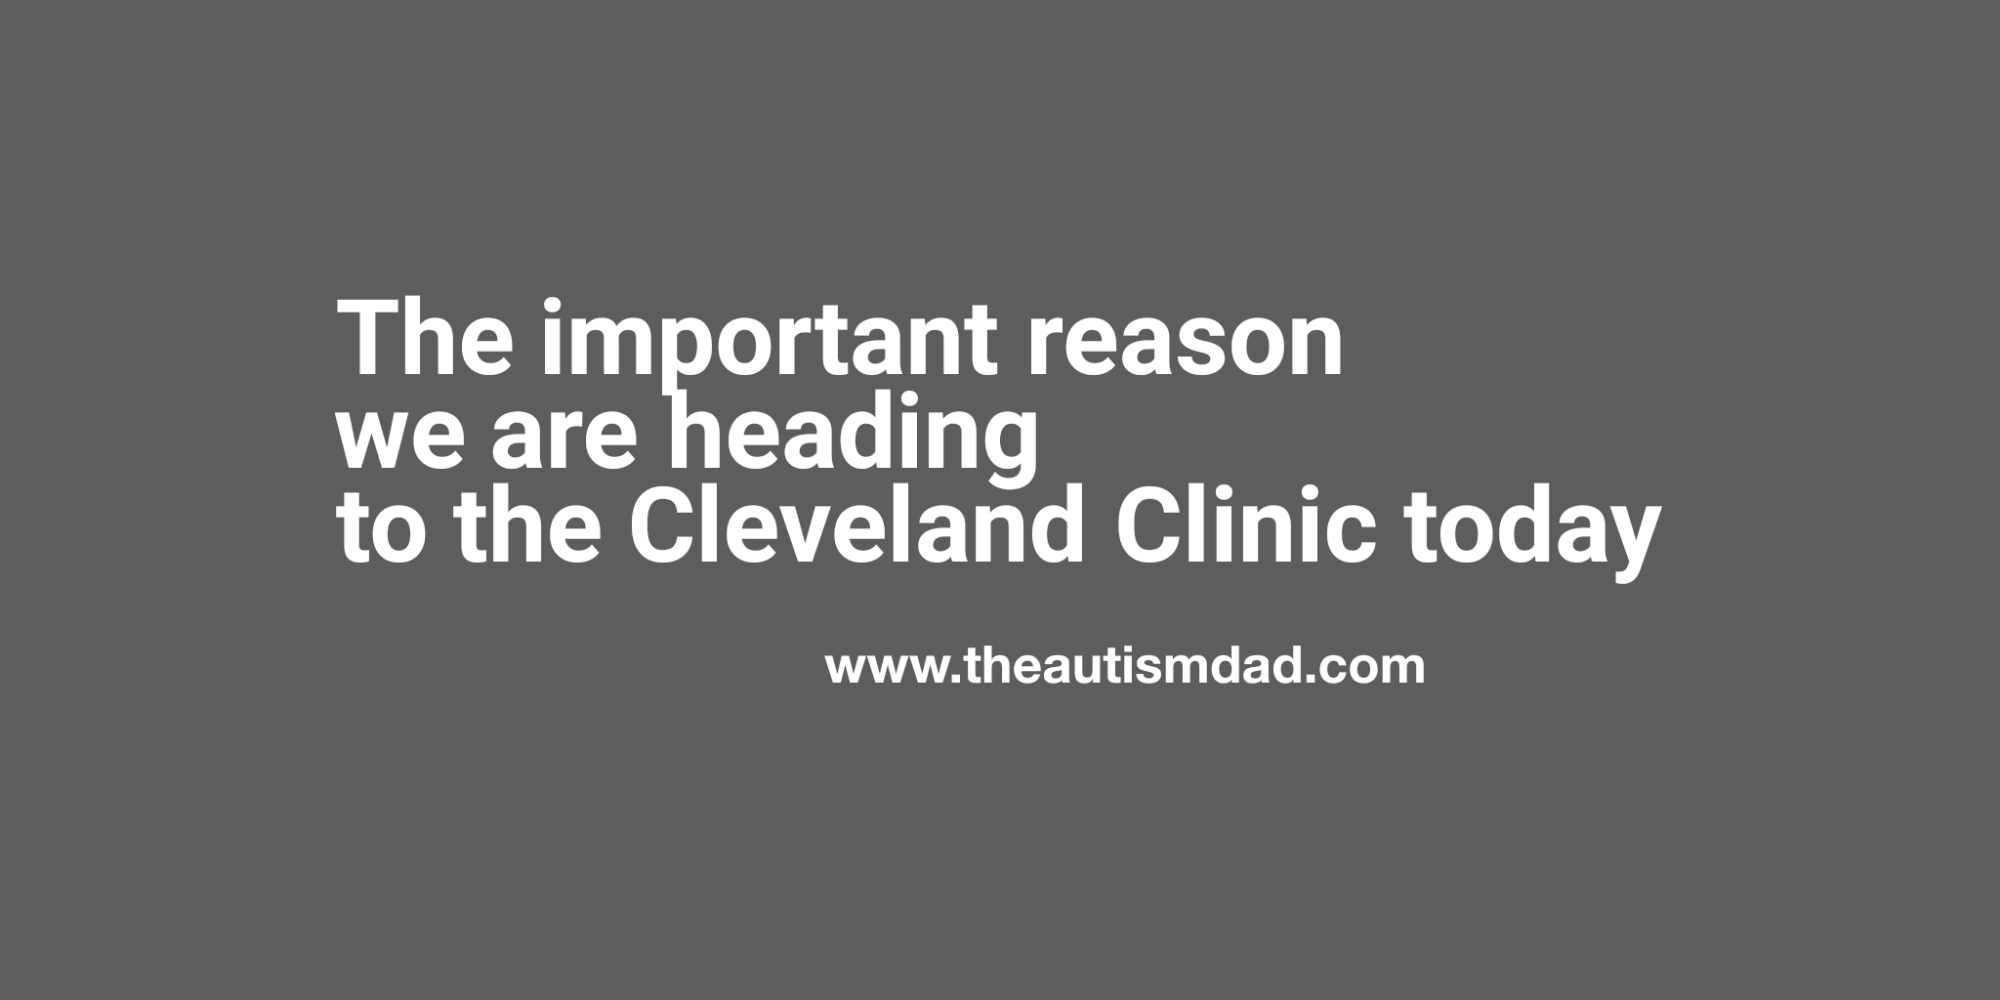 The important reason we are heading to the @clevelandclinic today